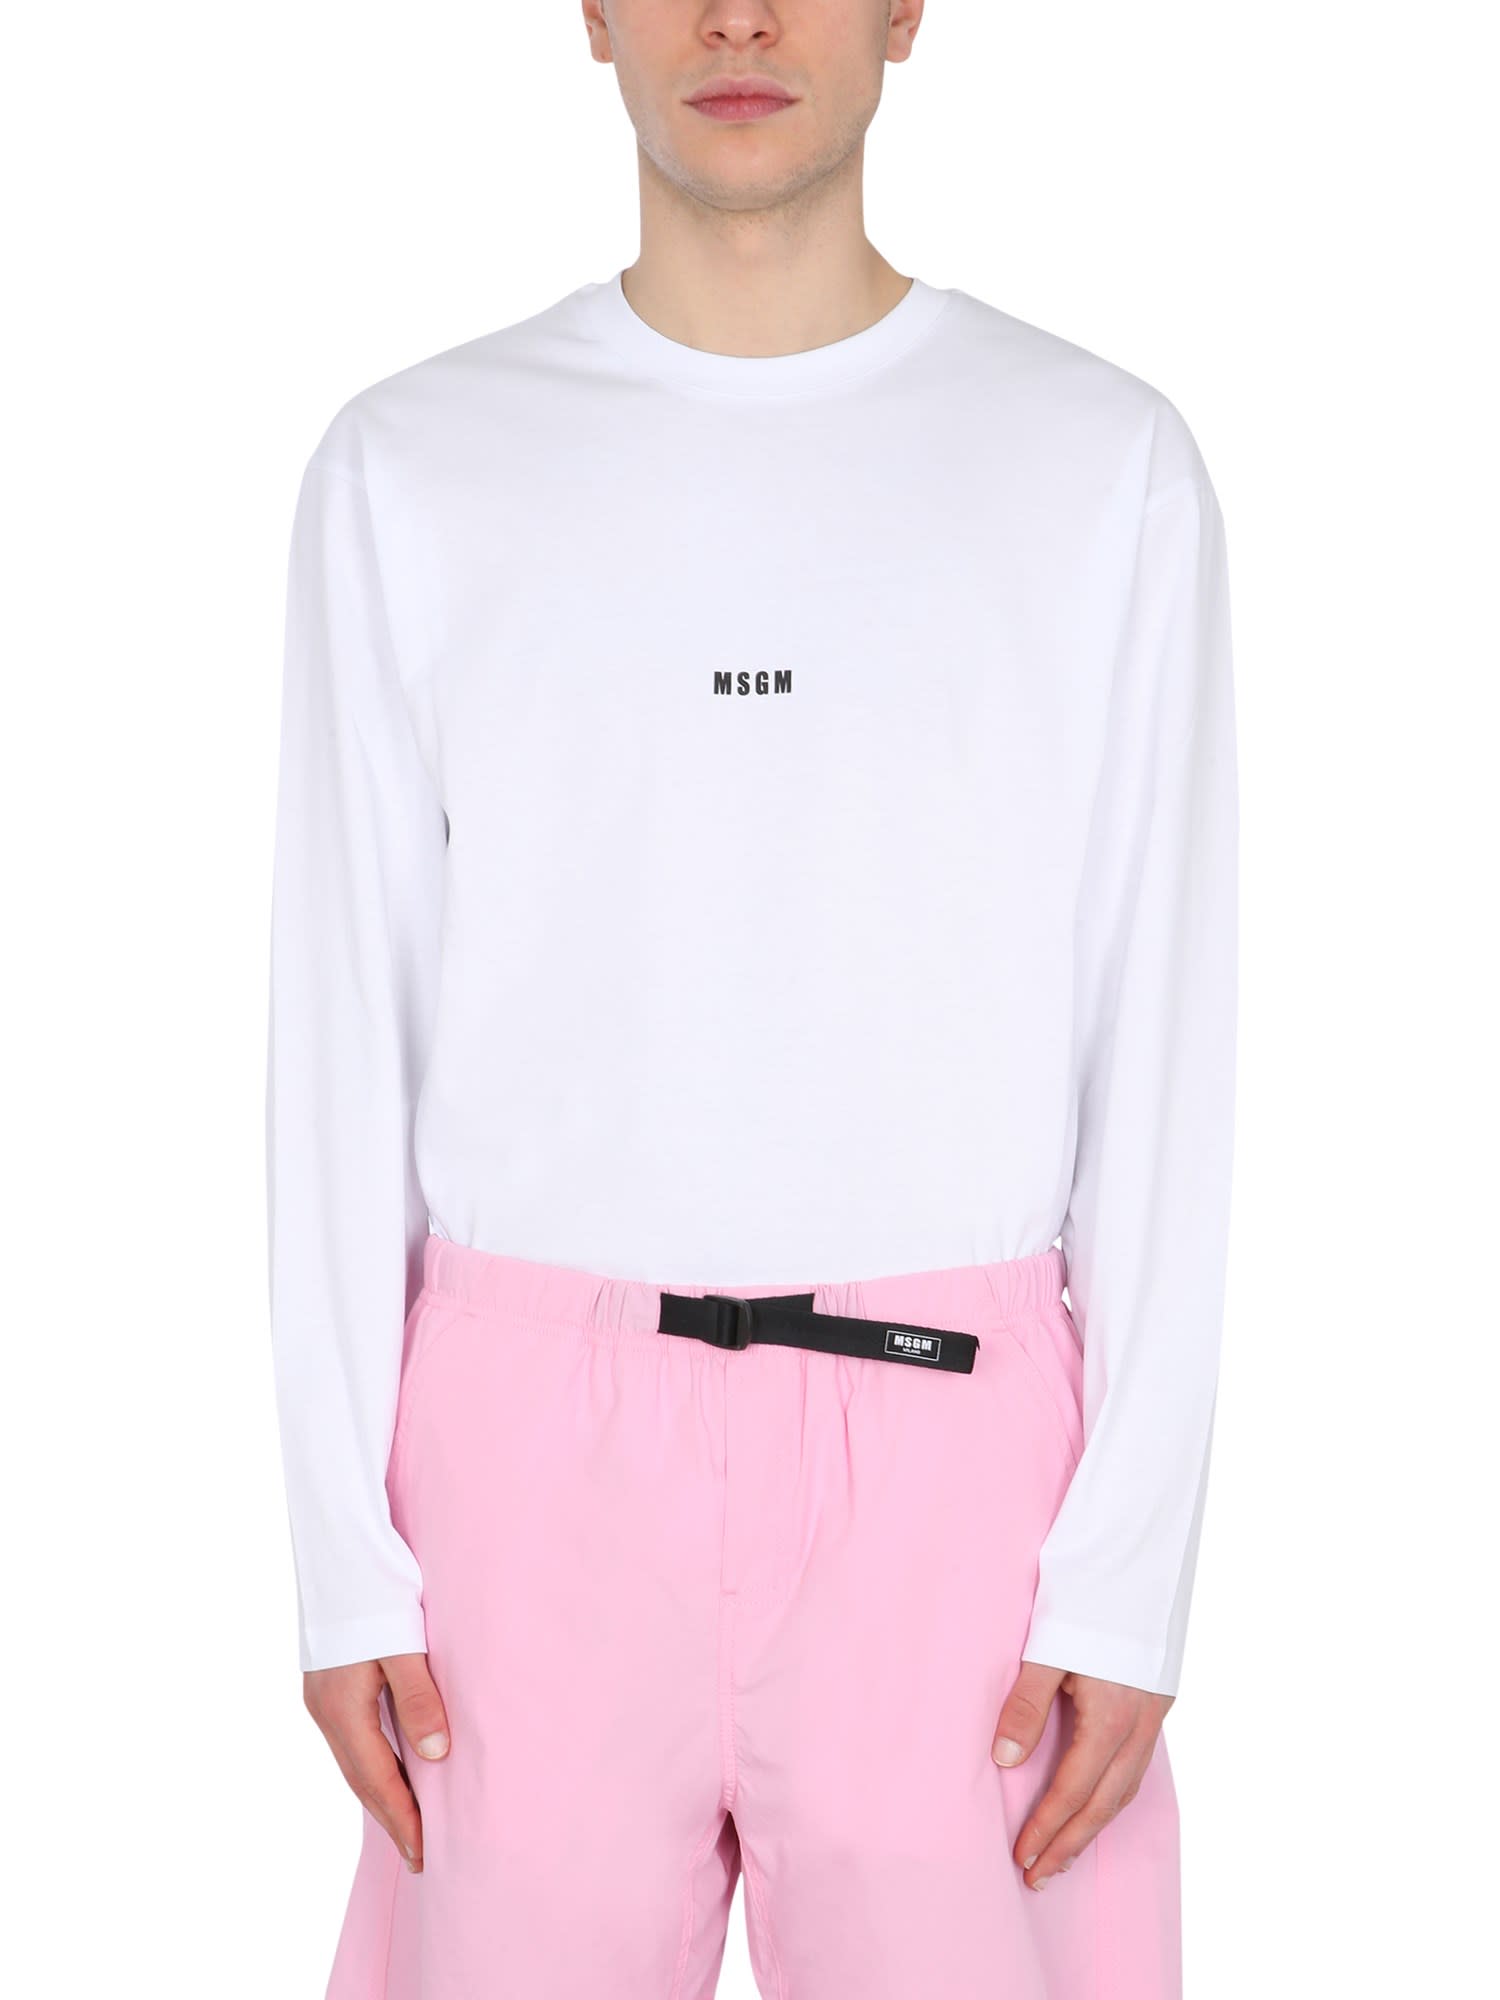 MSGM T-SHIRT WITH MICRO LOGO,3040MM160 21709801